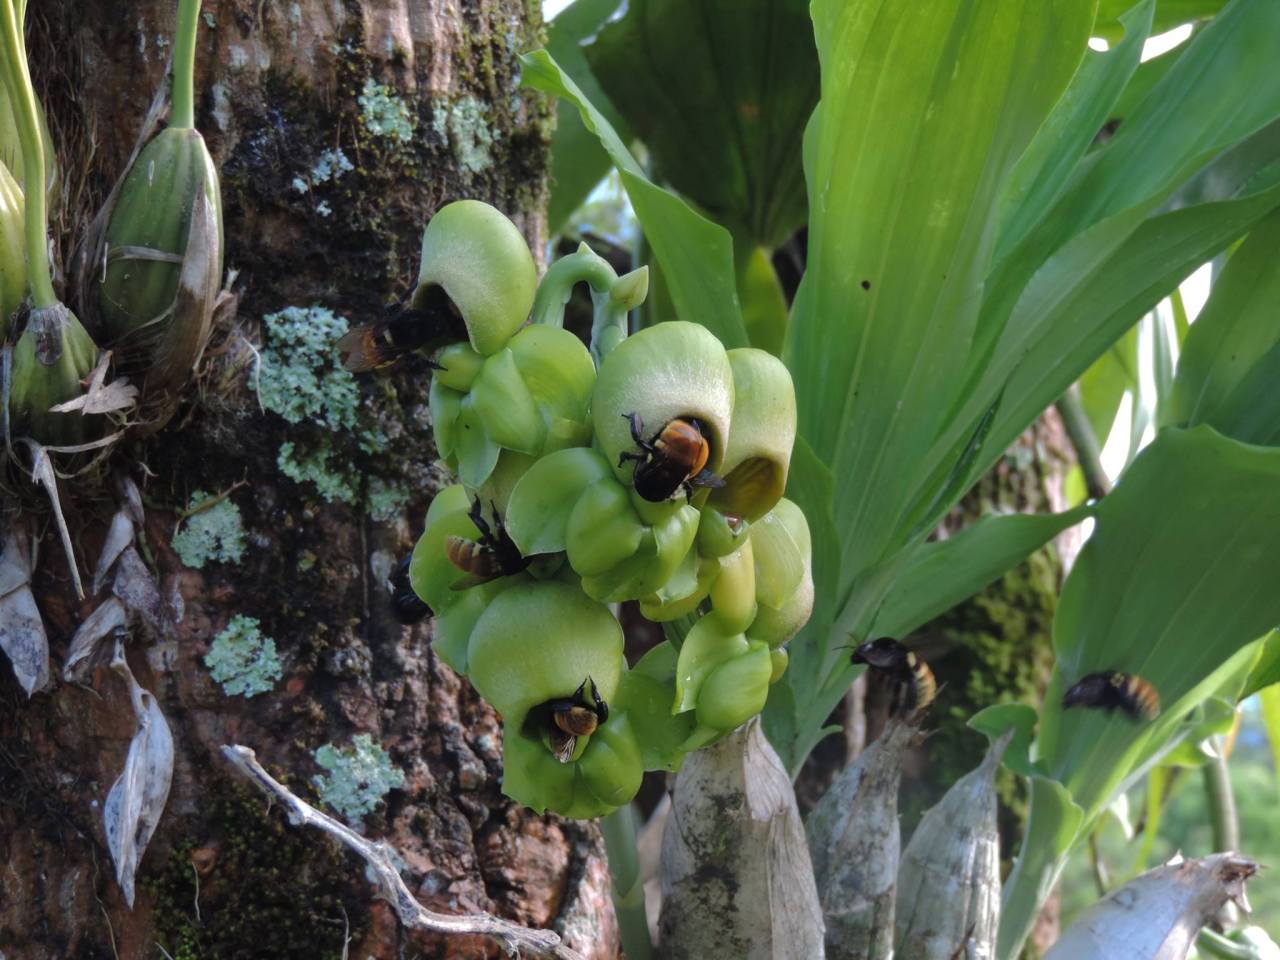 Female flowers of Catasetum integerrimum being visited by Eulaema sp. bees.
Orchidaceae: Catasetinae.
By Obet Sarmiento Cortez‎. [x]